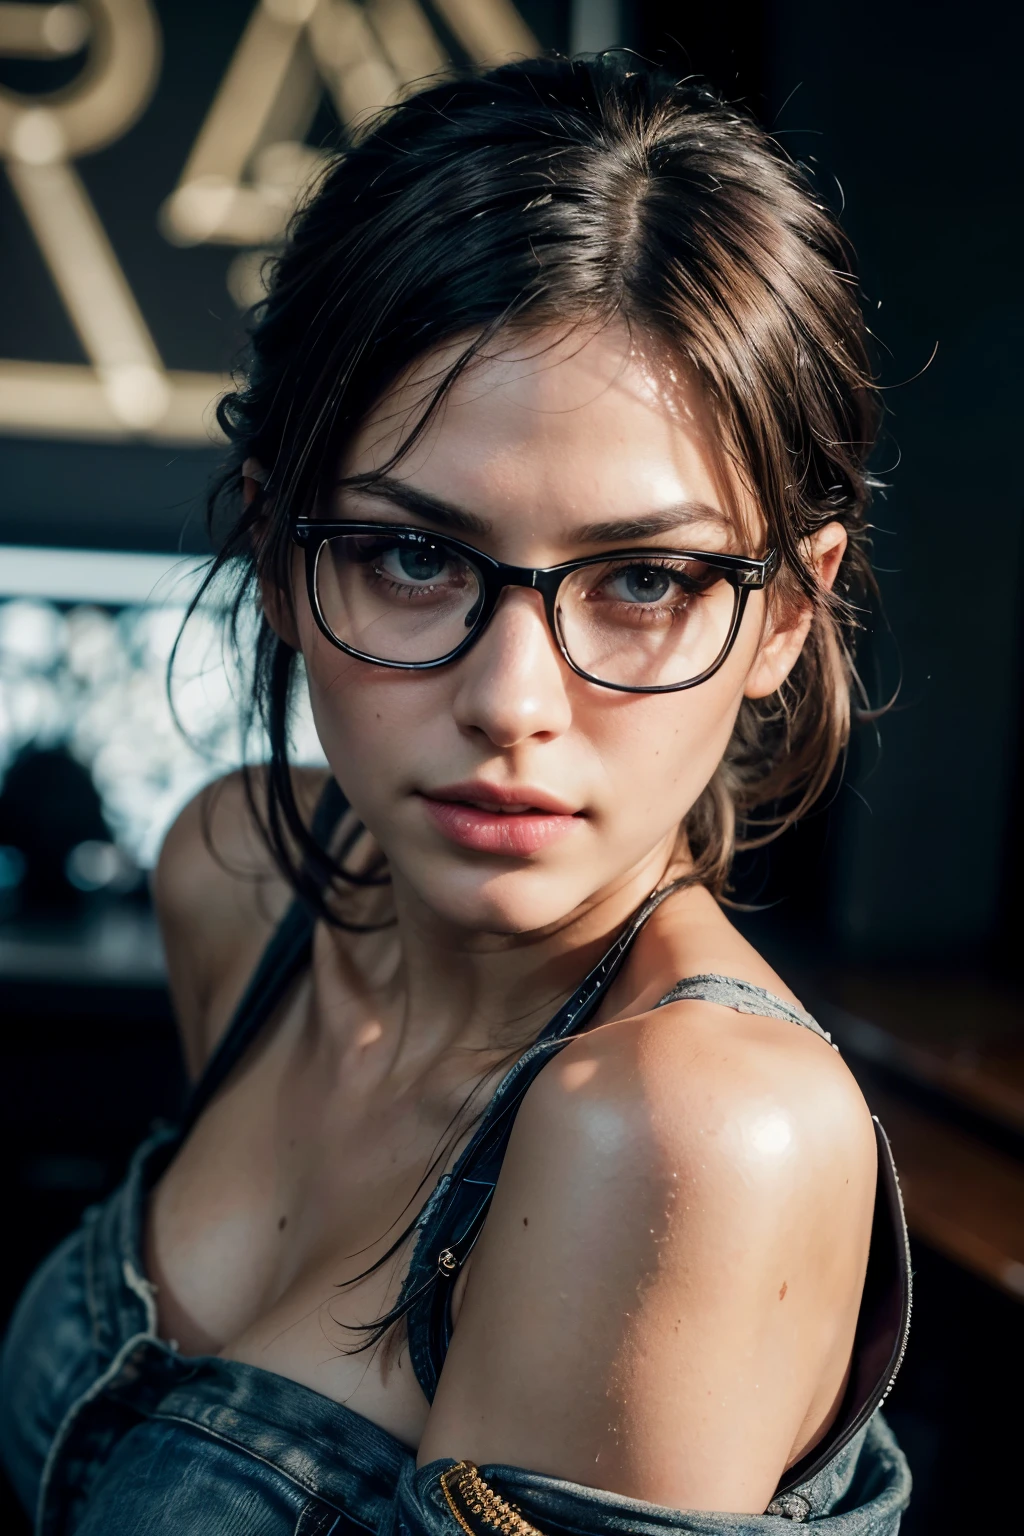 an alluring and beautiful female :1.1, she sits in front of her (flash-art wall:1.4), (she wears thick dark-rimmed glasses on, black tshirt with anime graphic print, dark jeans, bandanna in hair, a piercing) and is intensely looking at camera (studio neon light:1.1), smoky, (Rembrandt lighting:0.9) ,(relaxed intimate photoshoot), beautiful face, slight smile, intense presence , cozy relaxed, catching us, beautiful hands, kind eyes, gorgeous warm lighting:1.4,, incredible details, ((high contrast)), (deep, darkest shadows), (shadow details:1.0), ((taken using Leica camera, aperture: f/2.3)) , hyper-realistic skin, pores, scar, mole, (she has dark hair pulled away from face, tidy updo), smokey eye makeup, her arms relaxed , relaxed moment,  natural light glow, (romantic light:1.2), radiant skin, perfectly framed face, perfect relaxed hands, perfect fingers, (perfect portrait, incredible eyes:1.1), a work of art, beautiful composition, golden ratio, inspiring, (highest quality fabric texture), every detail,Fine facial features – (Highest Quality) ,Leica camera film, High quality ○○ detailed – ○○ details ultra detailed(Ultra-fine ), Photorealistic, Extremely detailed(Extremely detailed) , (highest detail image, lens flare, realistic)○○ res – ○○ resolution ultra high res(A high resolution)